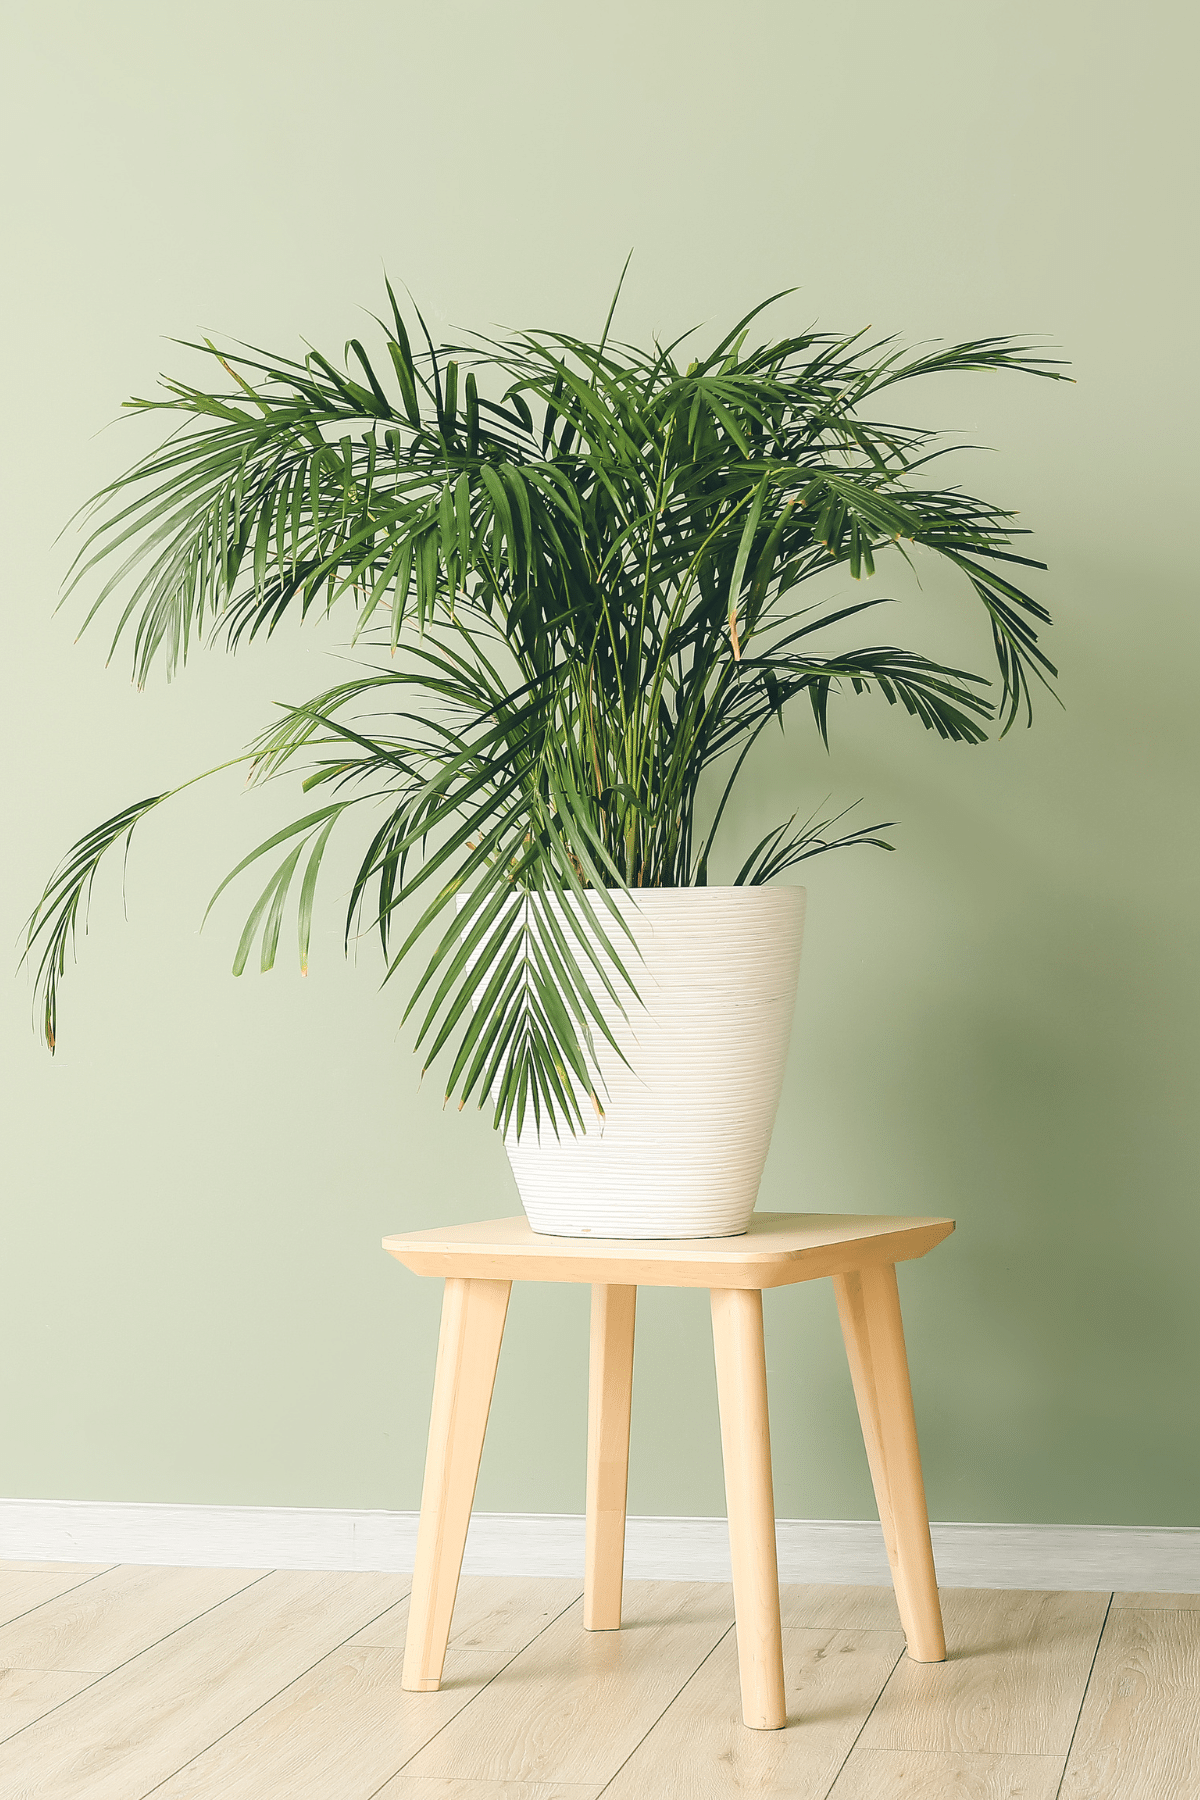 Green palm in white pot on a wooden table.